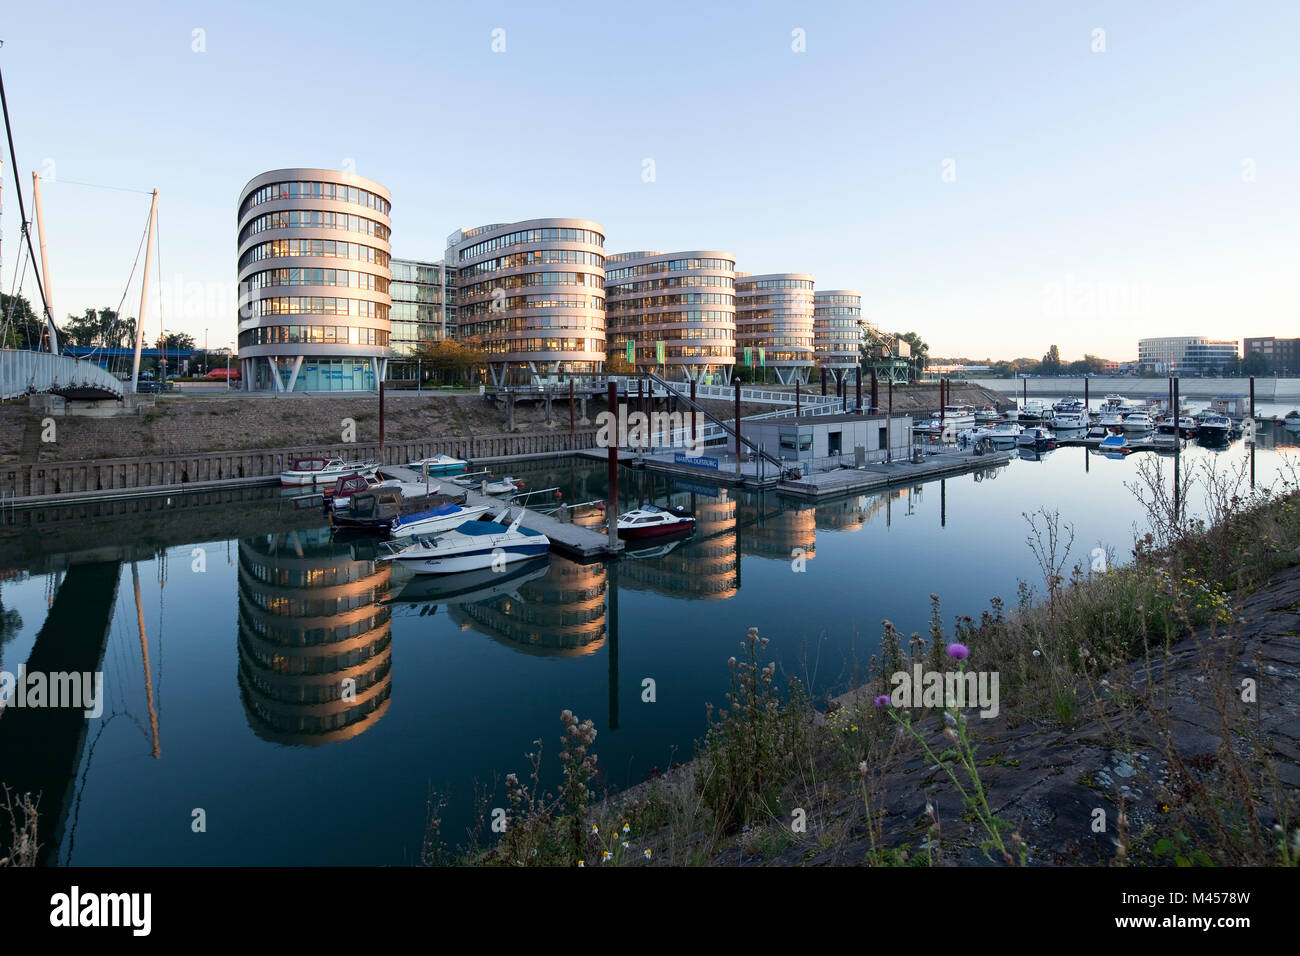 Office building 'Five Boats' at the inner harbour, Duisburg, Germany Stock Photo